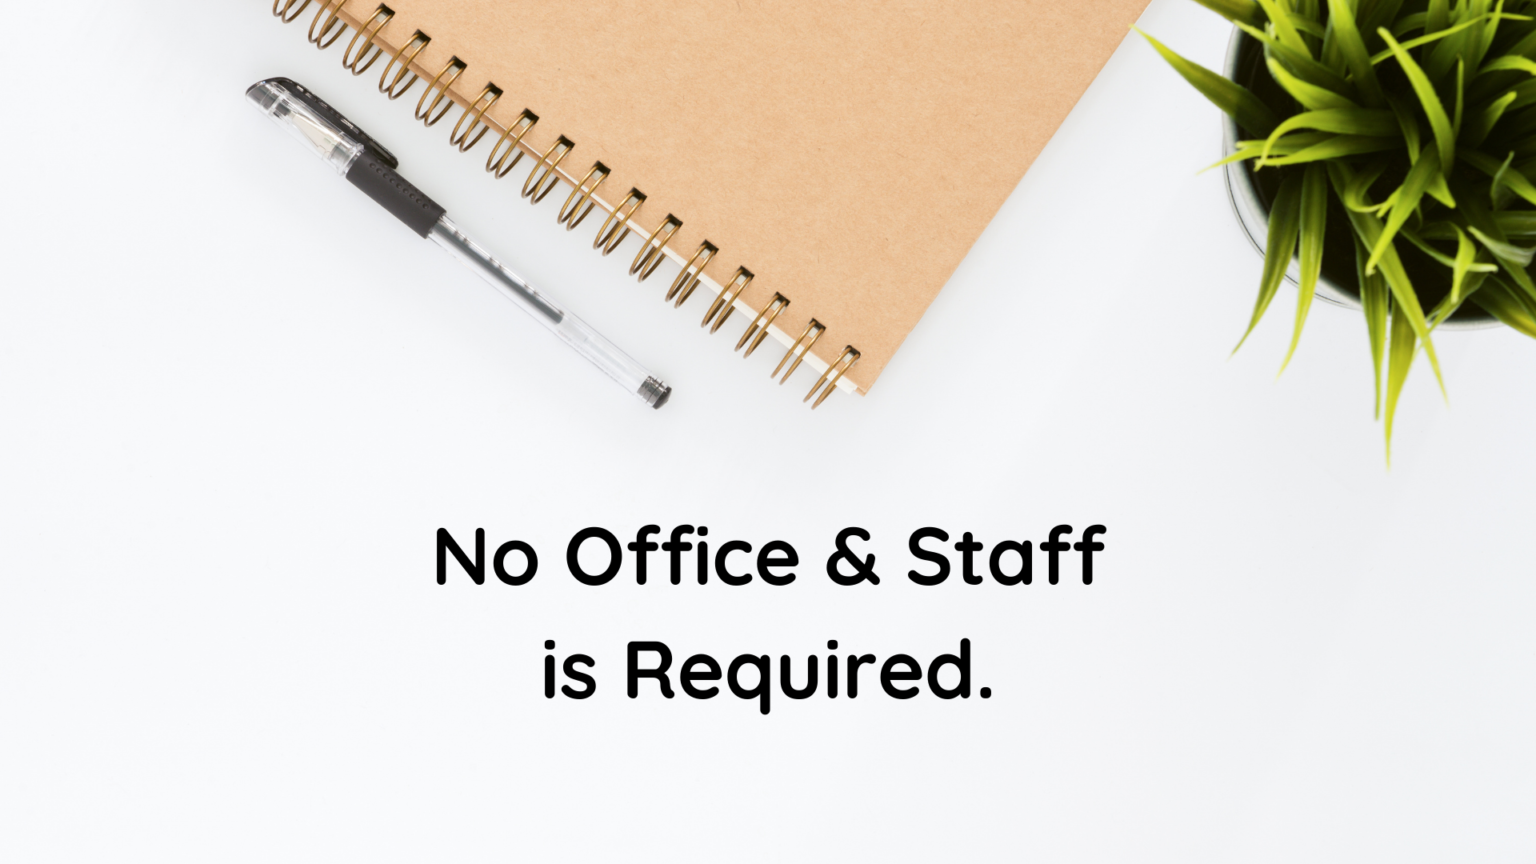 AT INITIAL STAGE NO OFFICE & STAFF IS REQUIRED